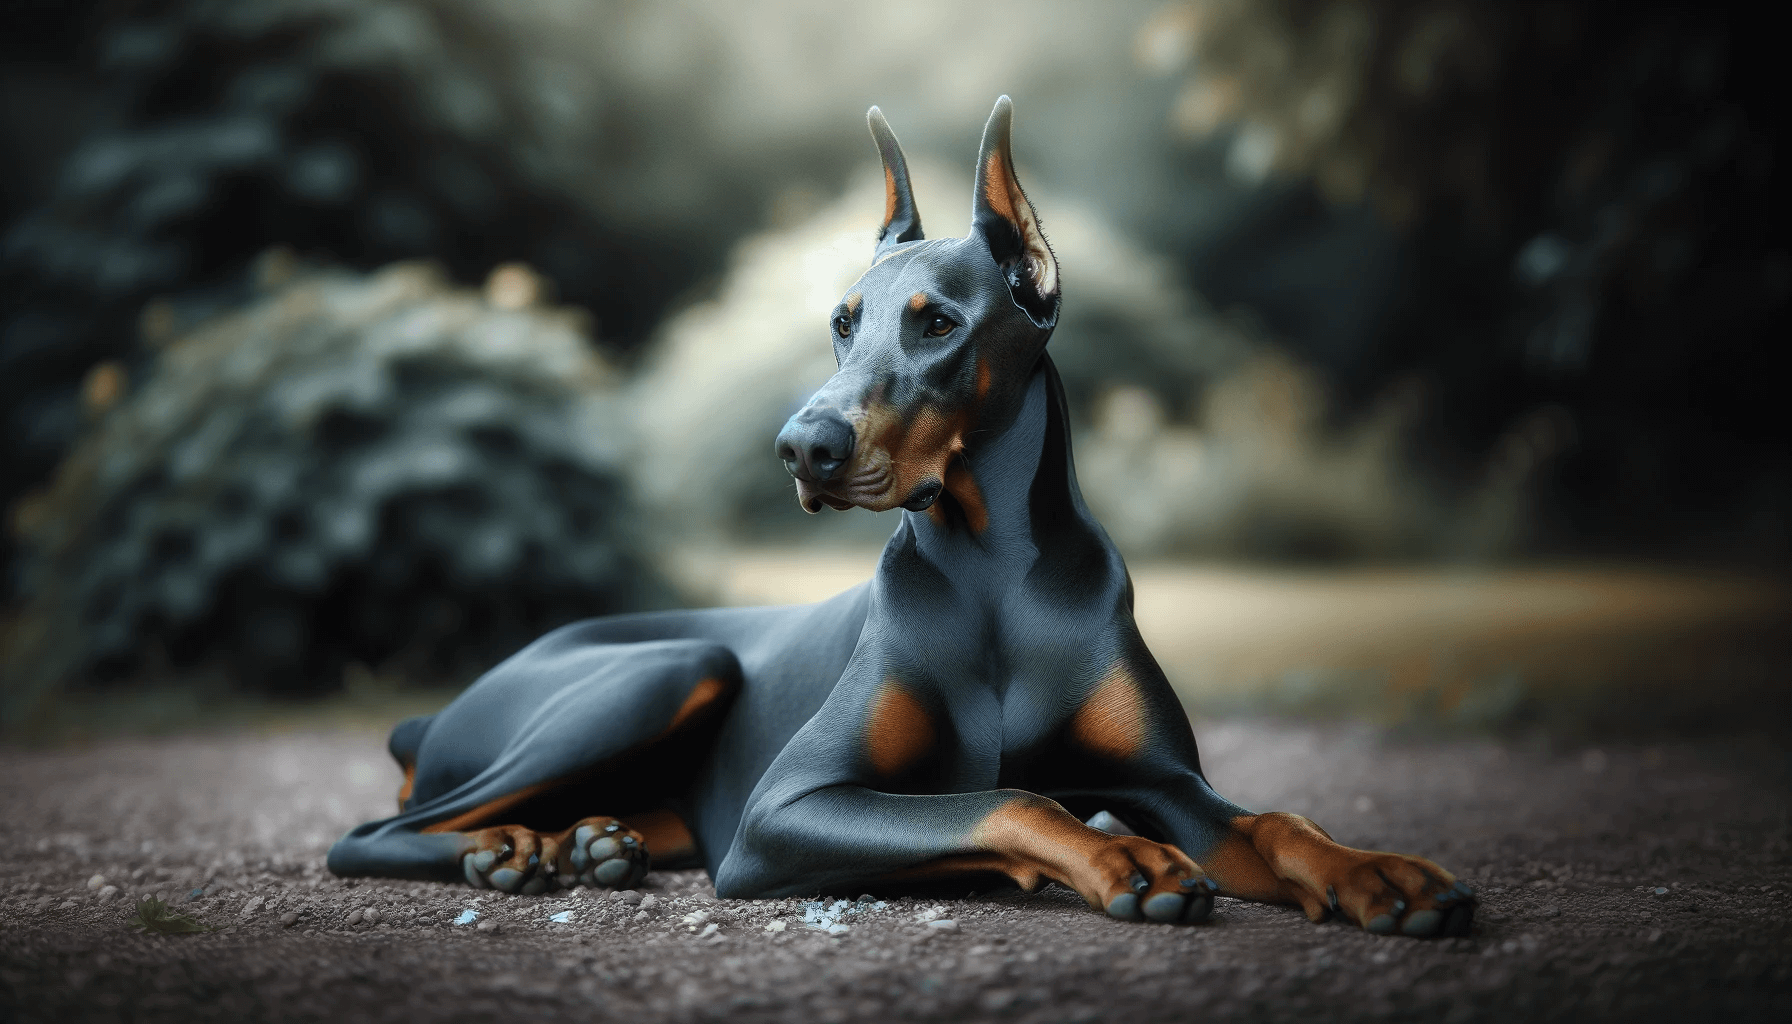 A relaxed Blue Doberman lying on the ground, possibly resting after play or exercise.